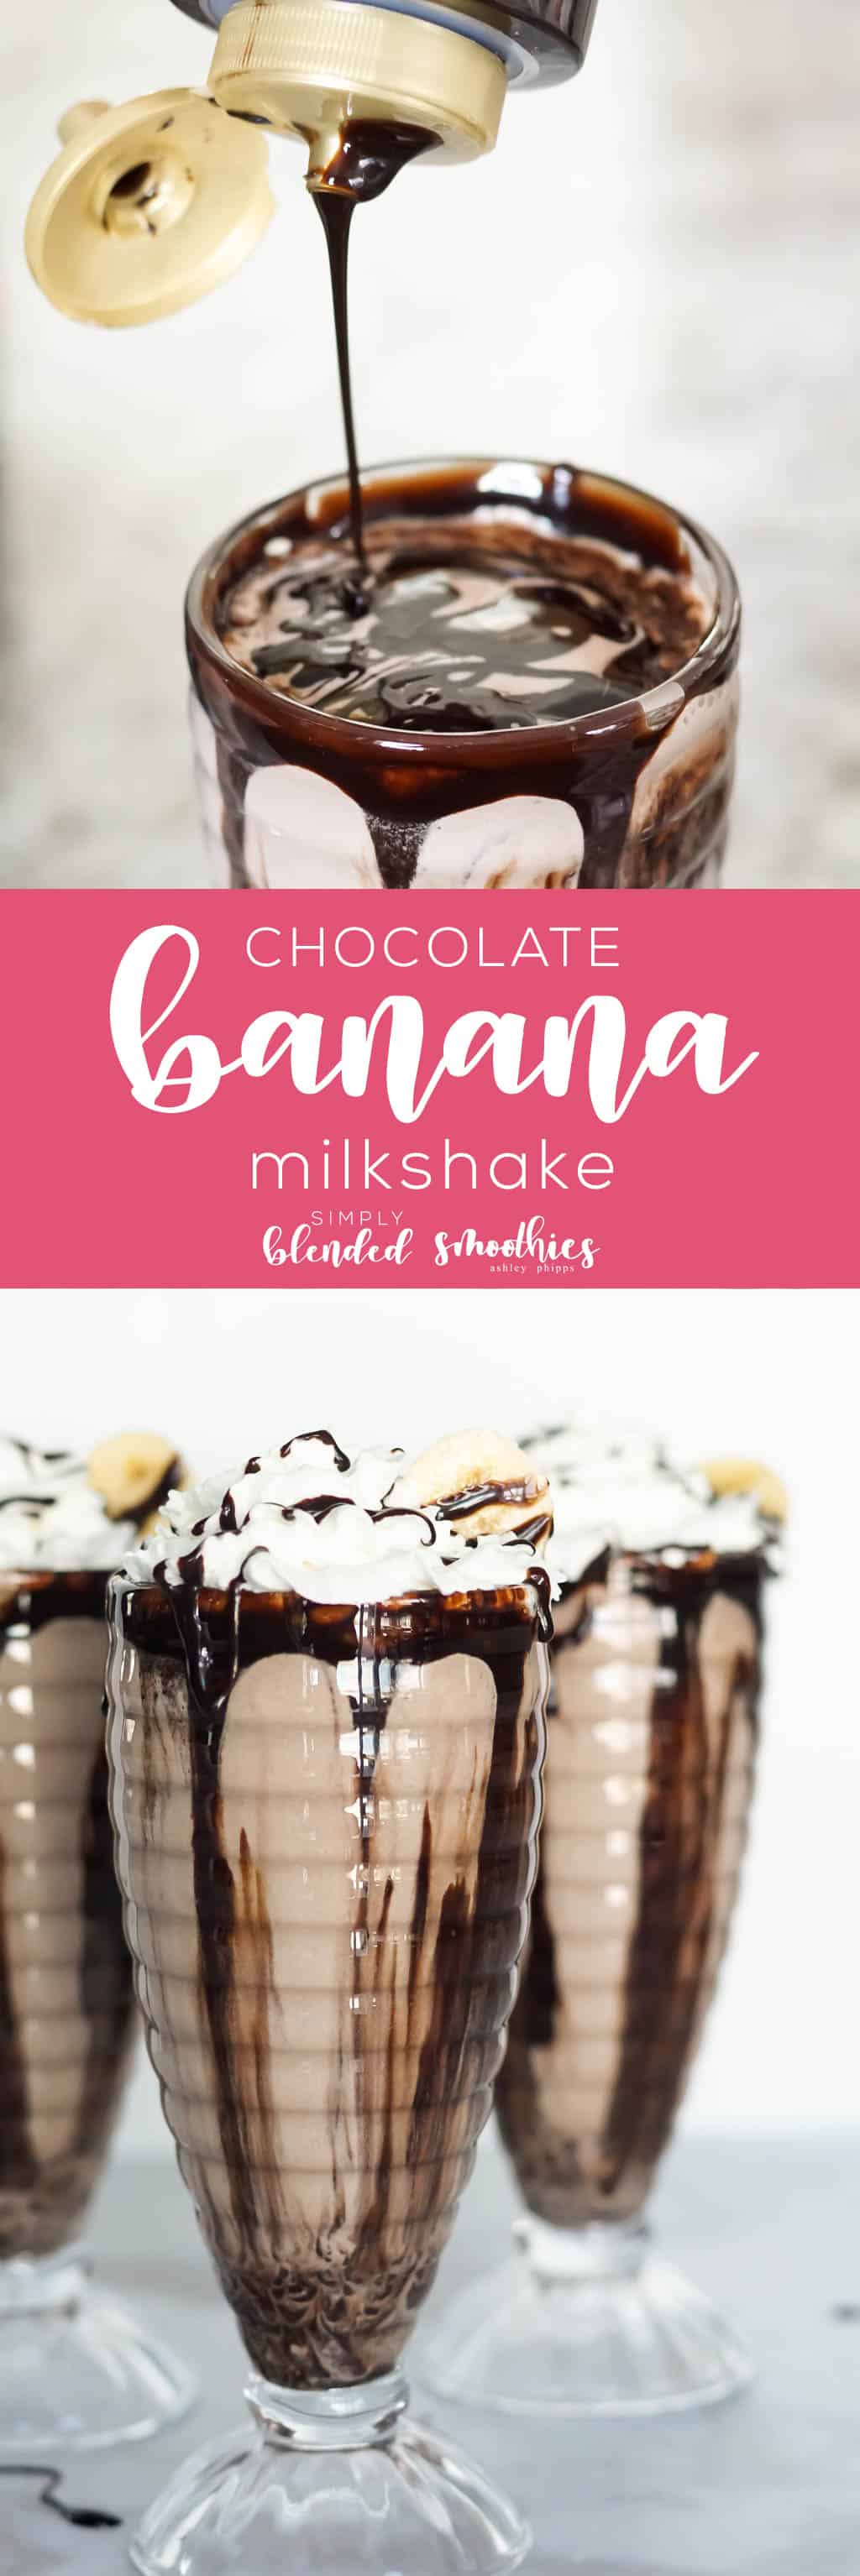 Chocolate Banana Milkshake - This Chocolate Banana Milkshake Is A Delicious Treat - It Is So Simple To Make And It Is Something Your Whole Family Will Love